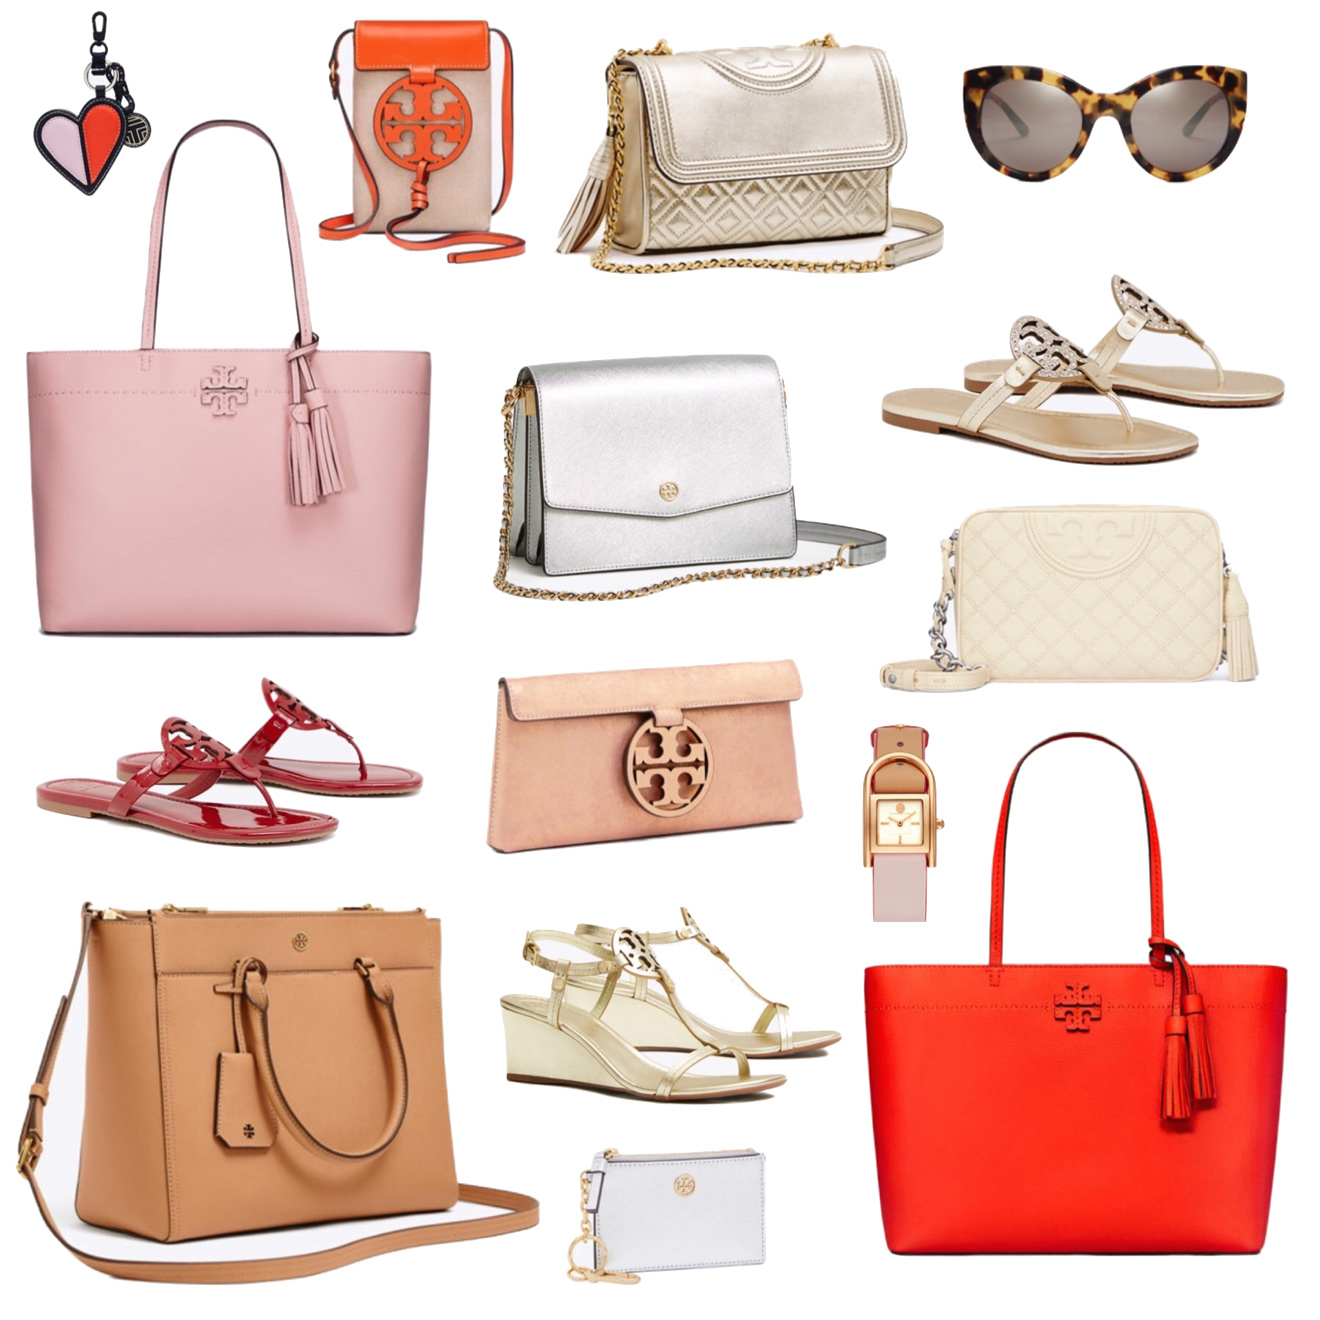 Tory Burch Private Sale Up To 70% Off!! - The Double Take Girls